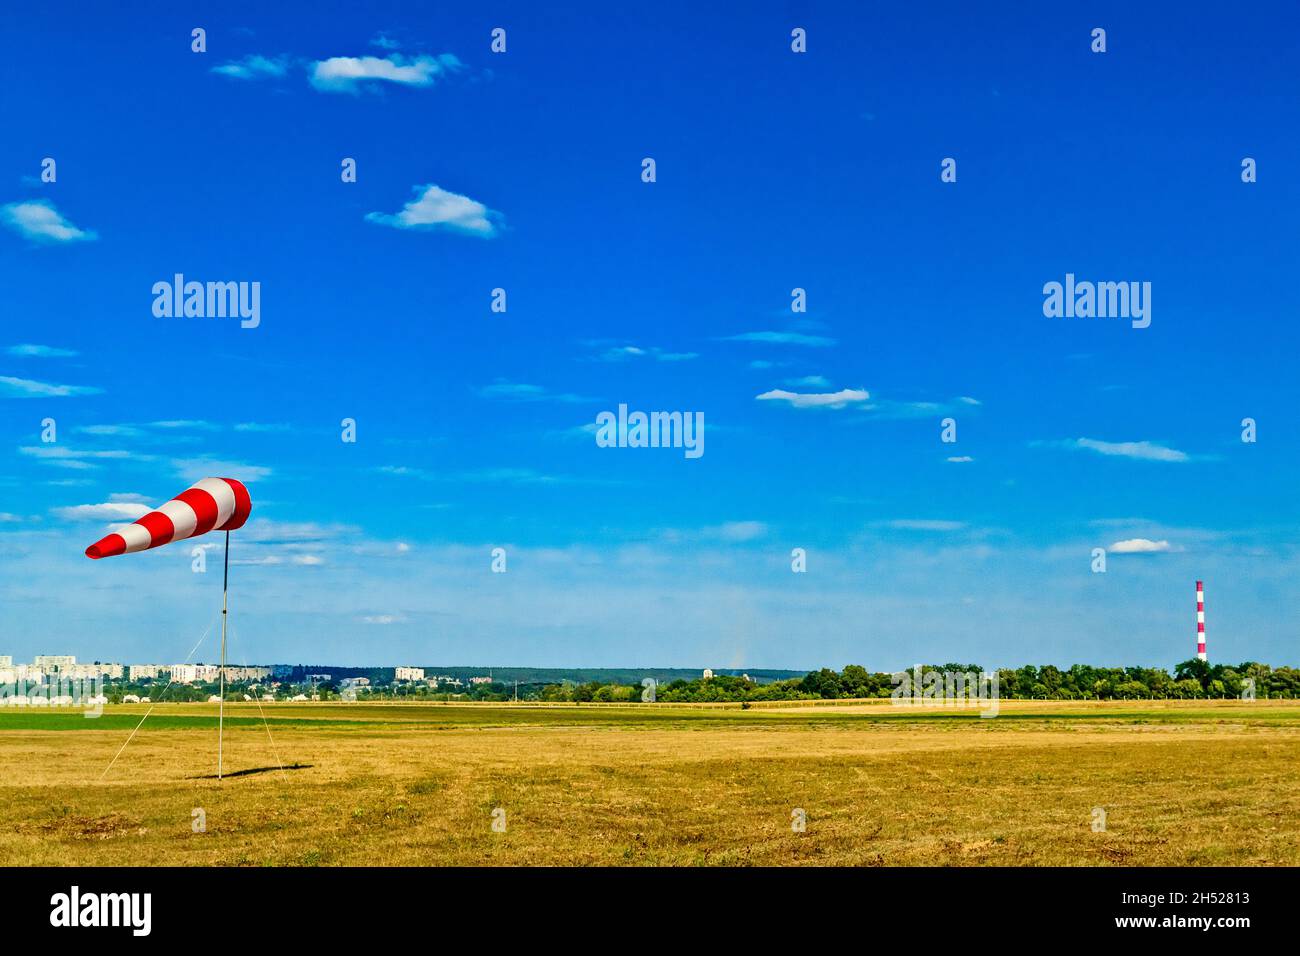 Red and white windsock wind sock on blue sky, green field and clouds background on aerodrome or airdrome. Shows wind speed and direction. Stock Photo